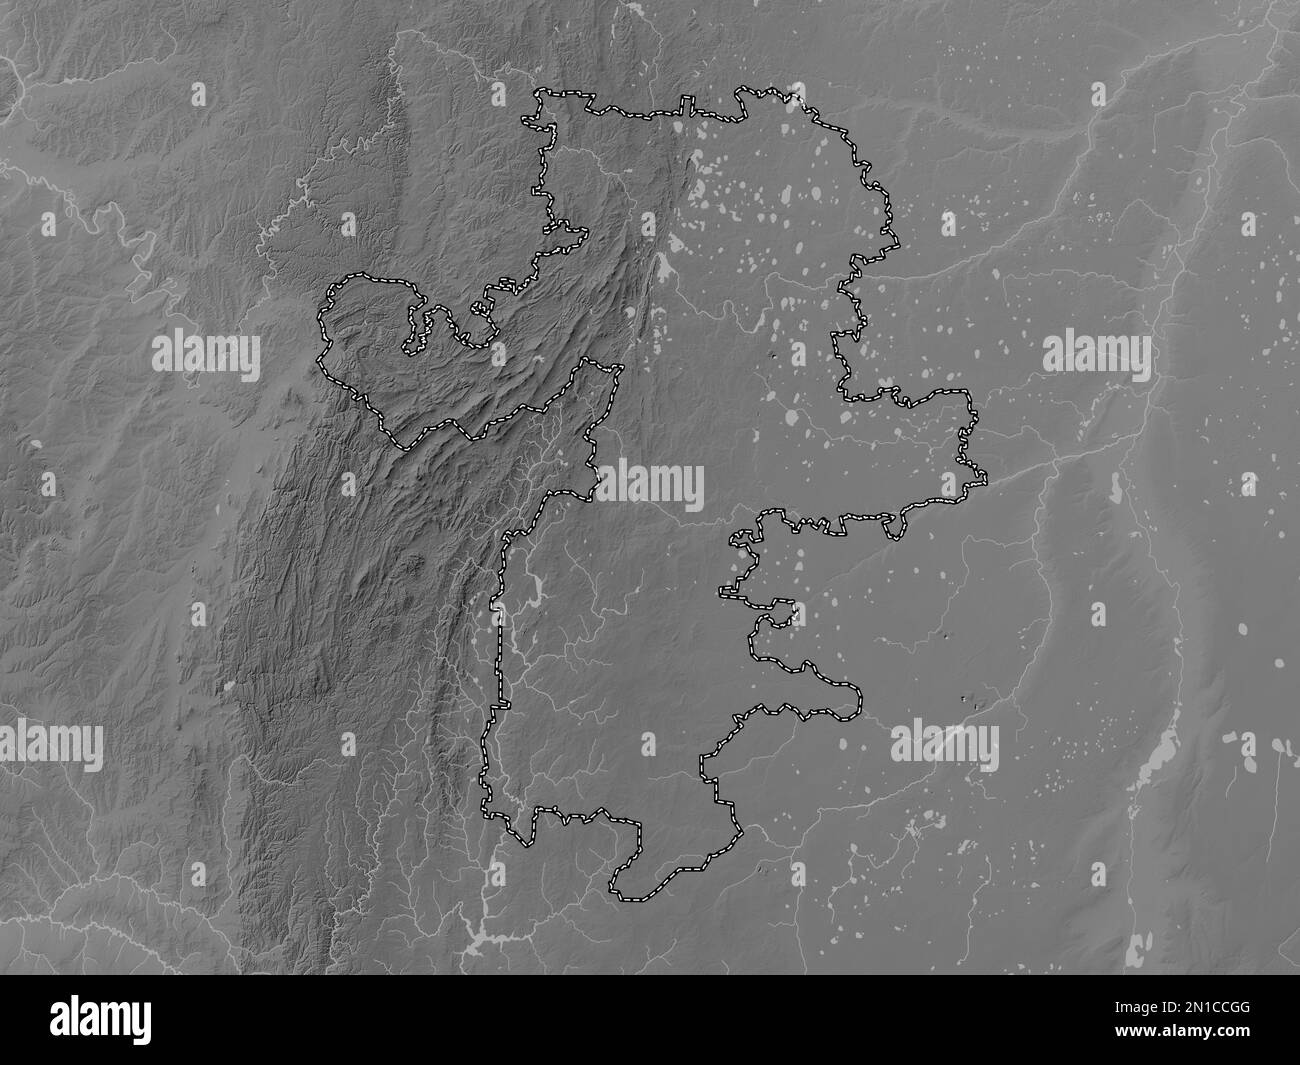 Chelyabinsk, region of Russia. Grayscale elevation map with lakes and rivers Stock Photo